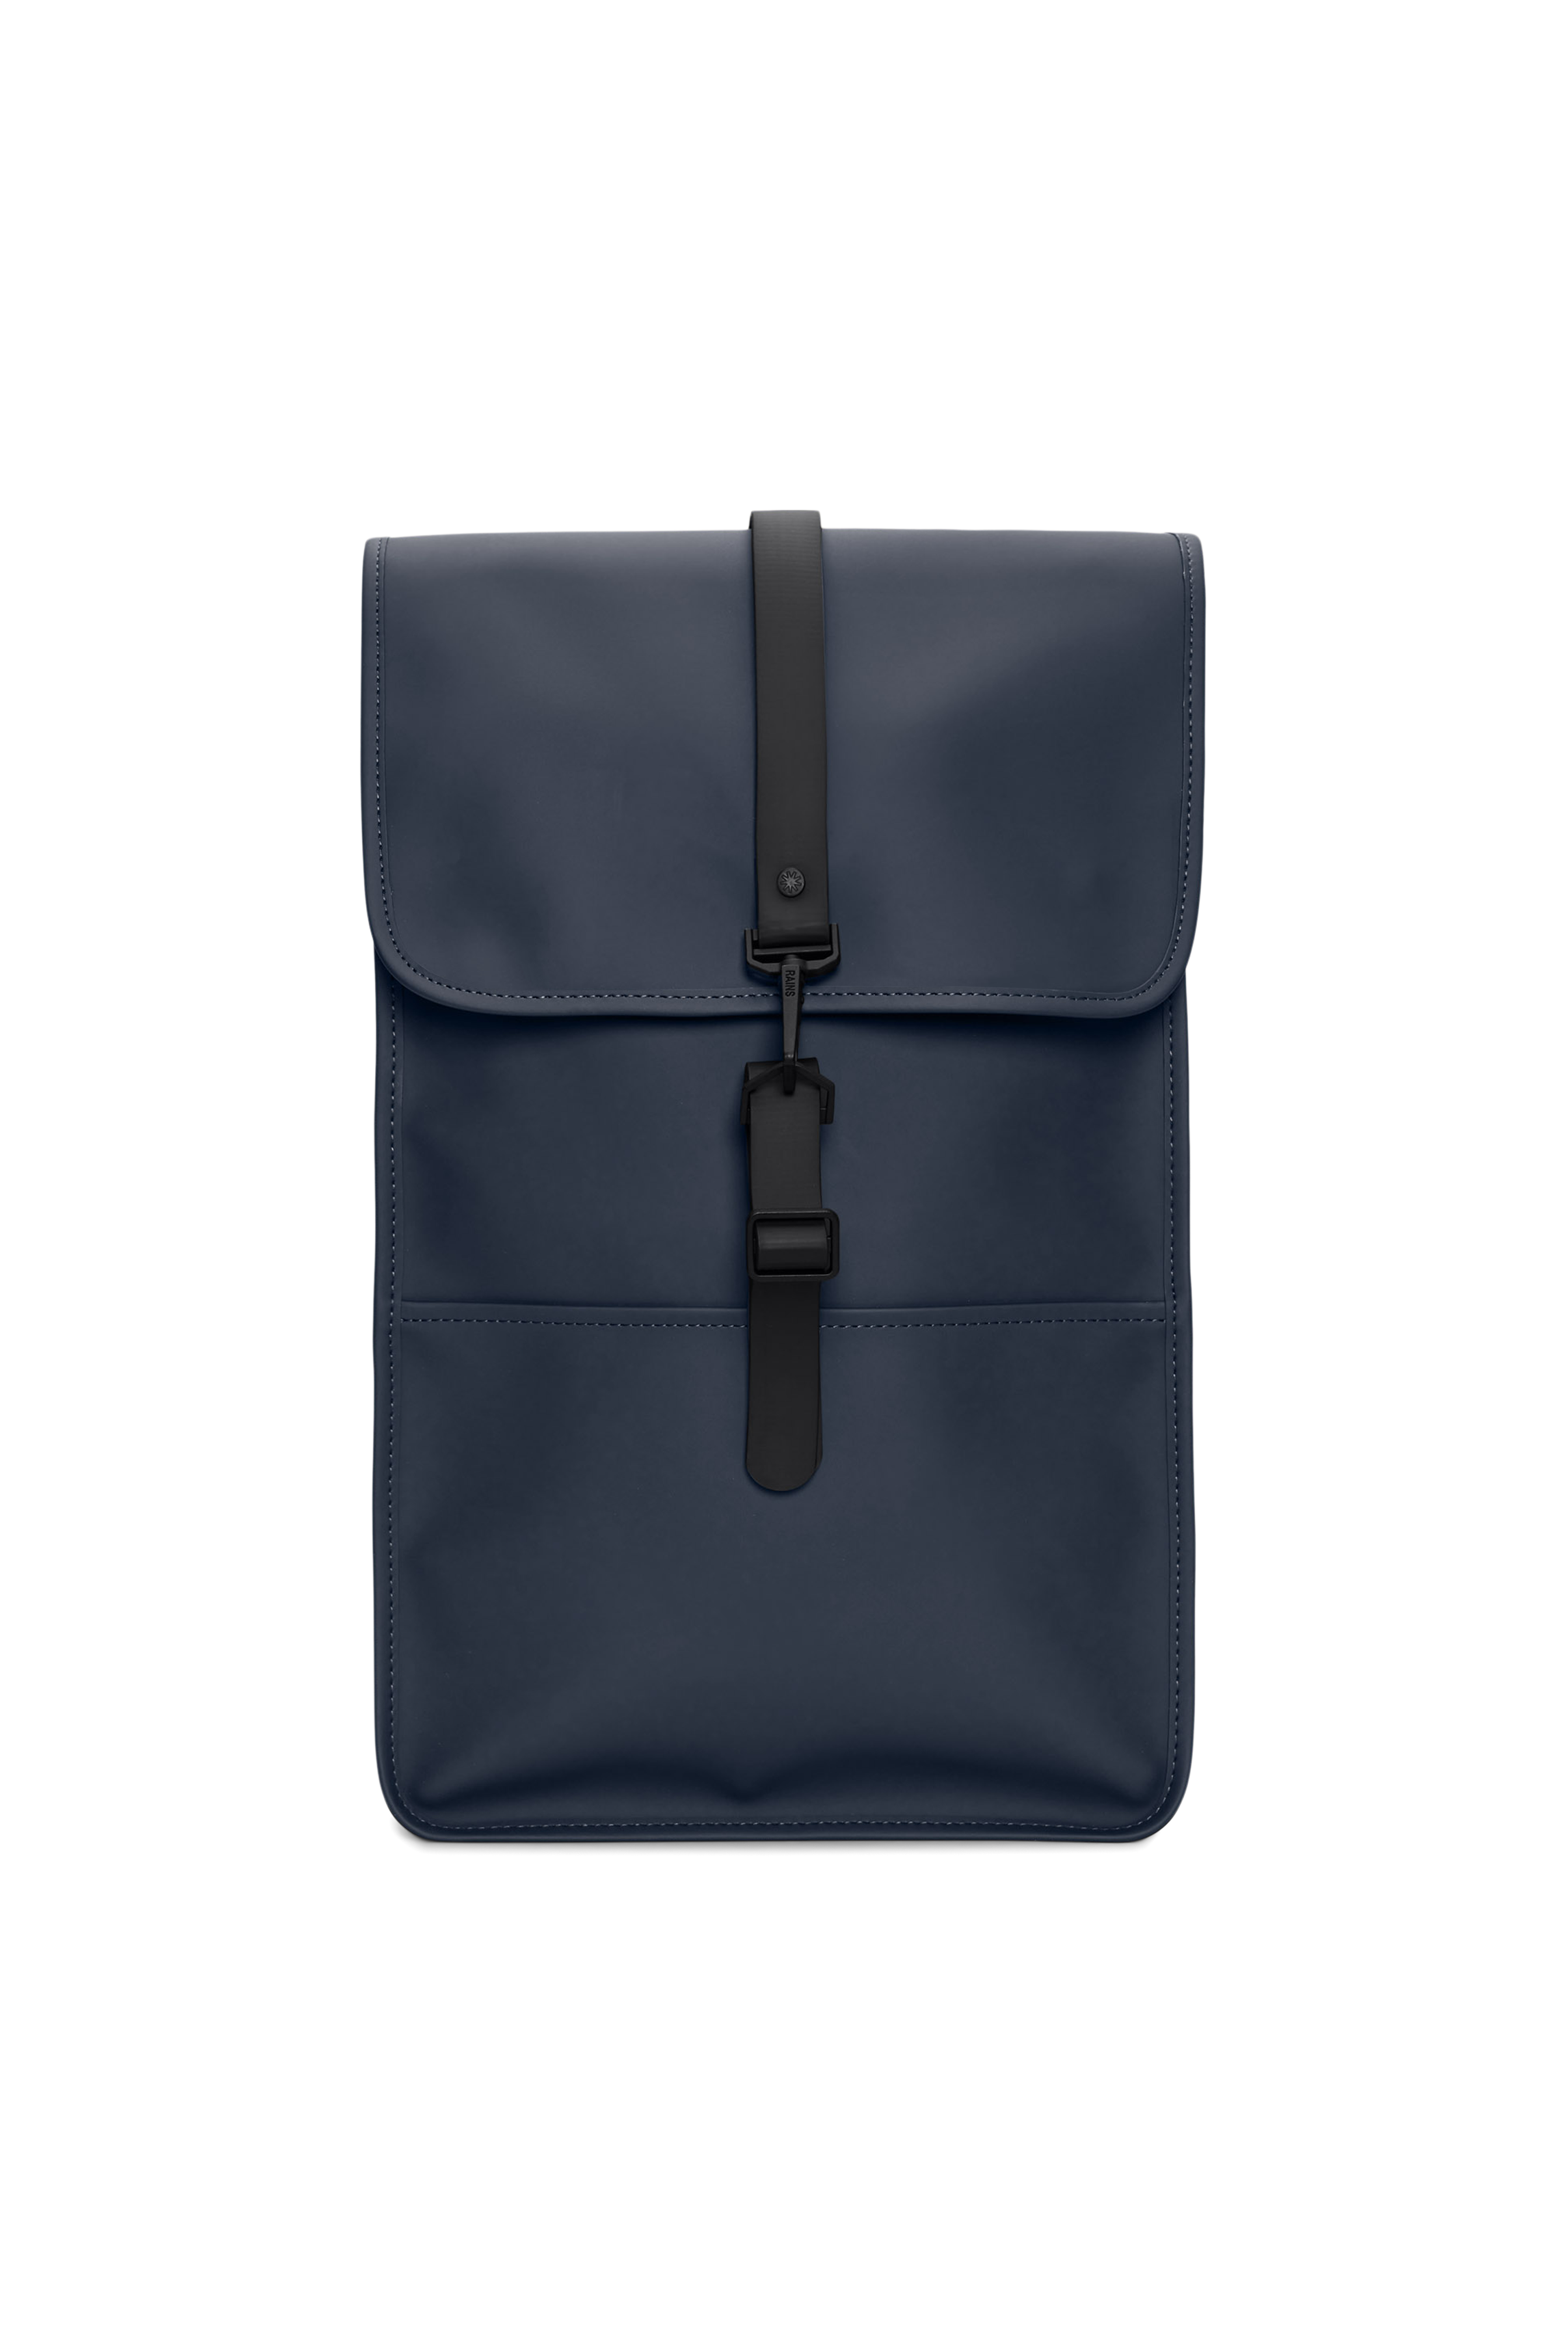 Rains® Backpack in Navy for £89 | Free Shipping